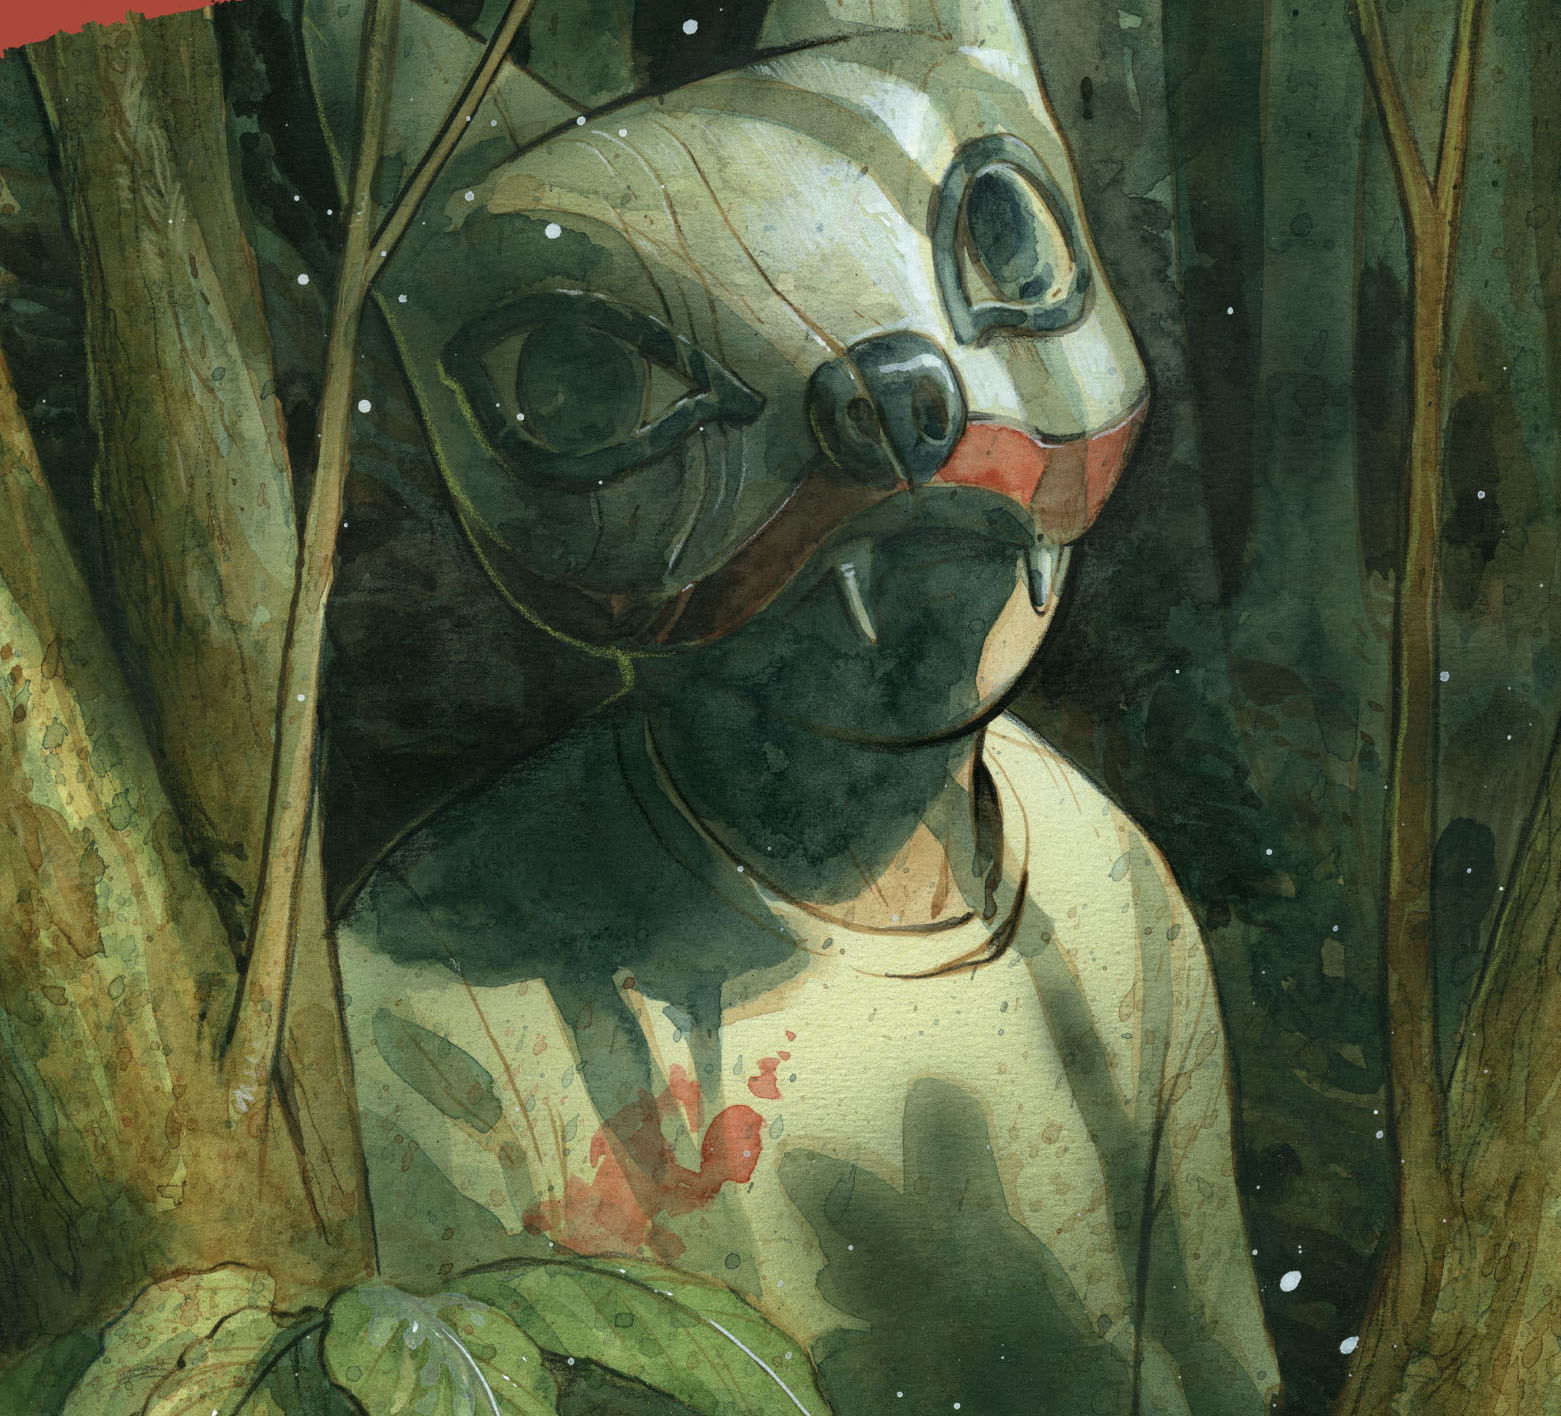 Tyler Crook's epic continues in 'The Lonesome Hunters: The Wolf Child' #1